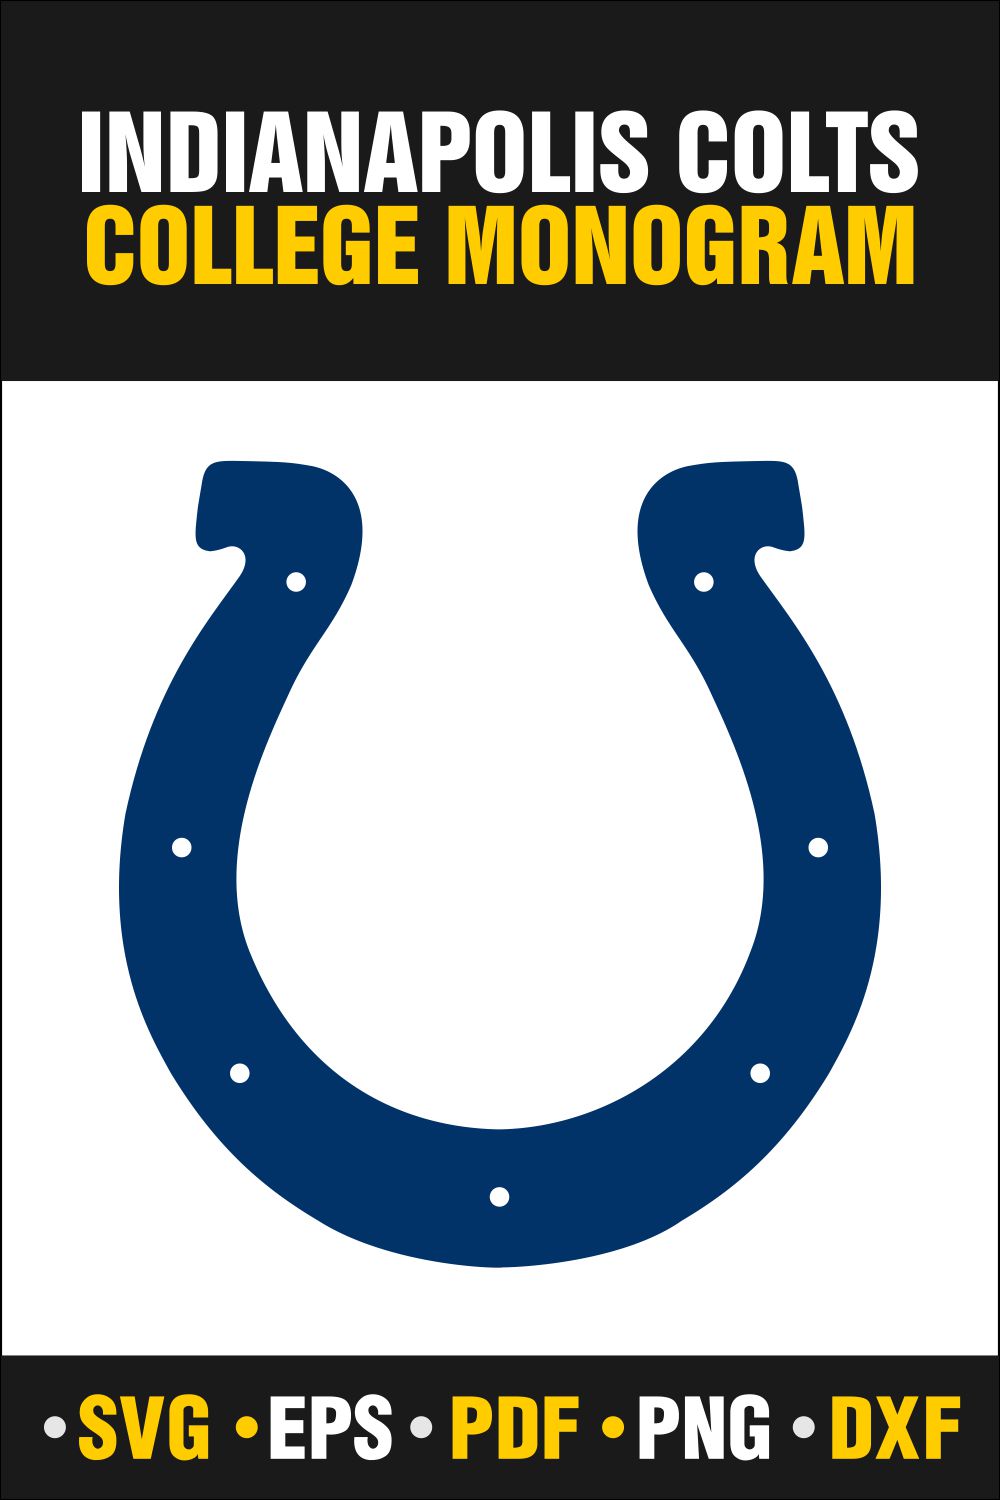 Indianapolis Colts SVG, PDF, PNG, DXF, EPS - Only $2 pinterest preview image.